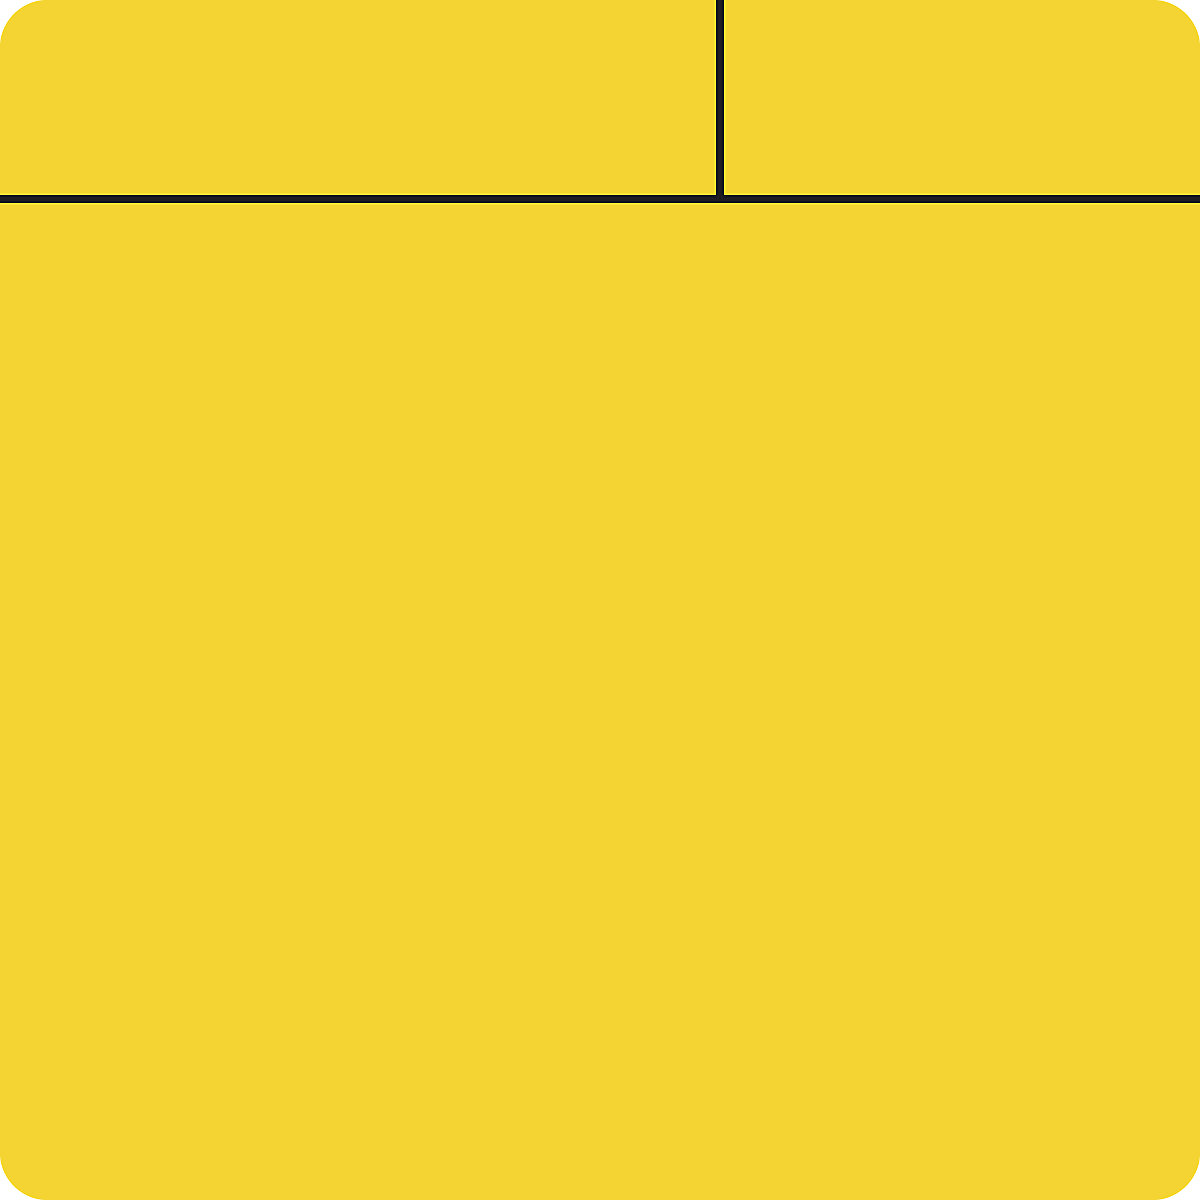 Post-it notes, LxW 75 x 75 mm, pack of 10, yellow